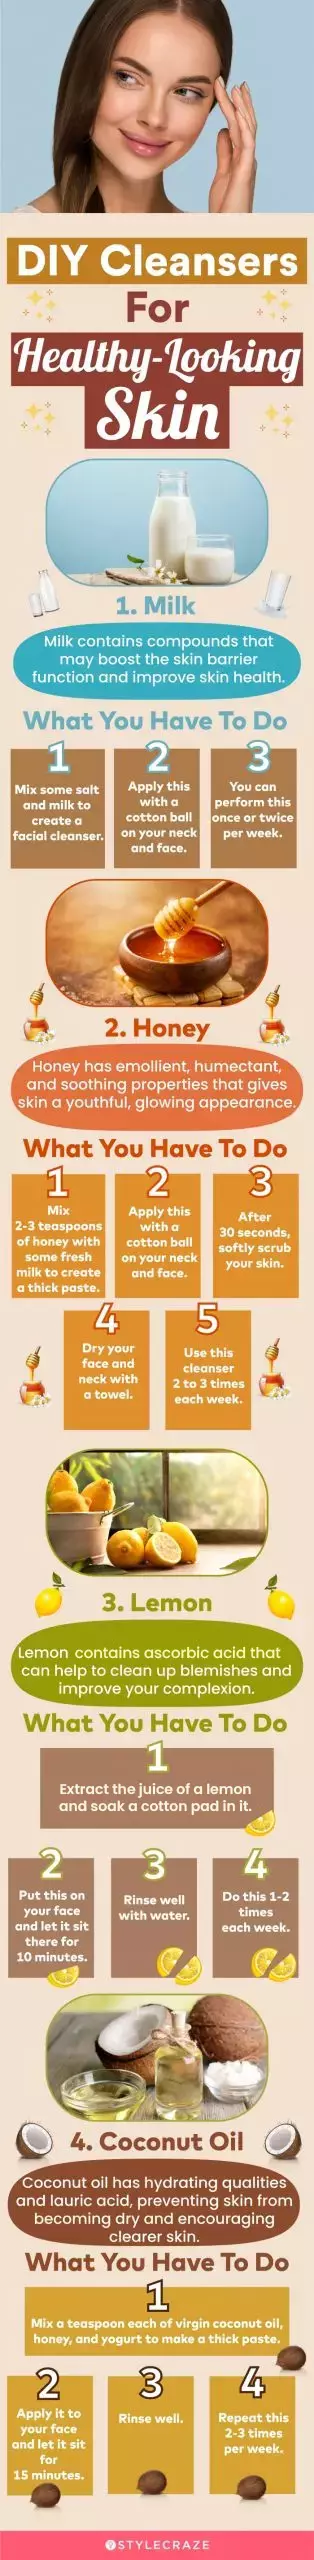 diy cleansers for healthy looking skin (infographic)